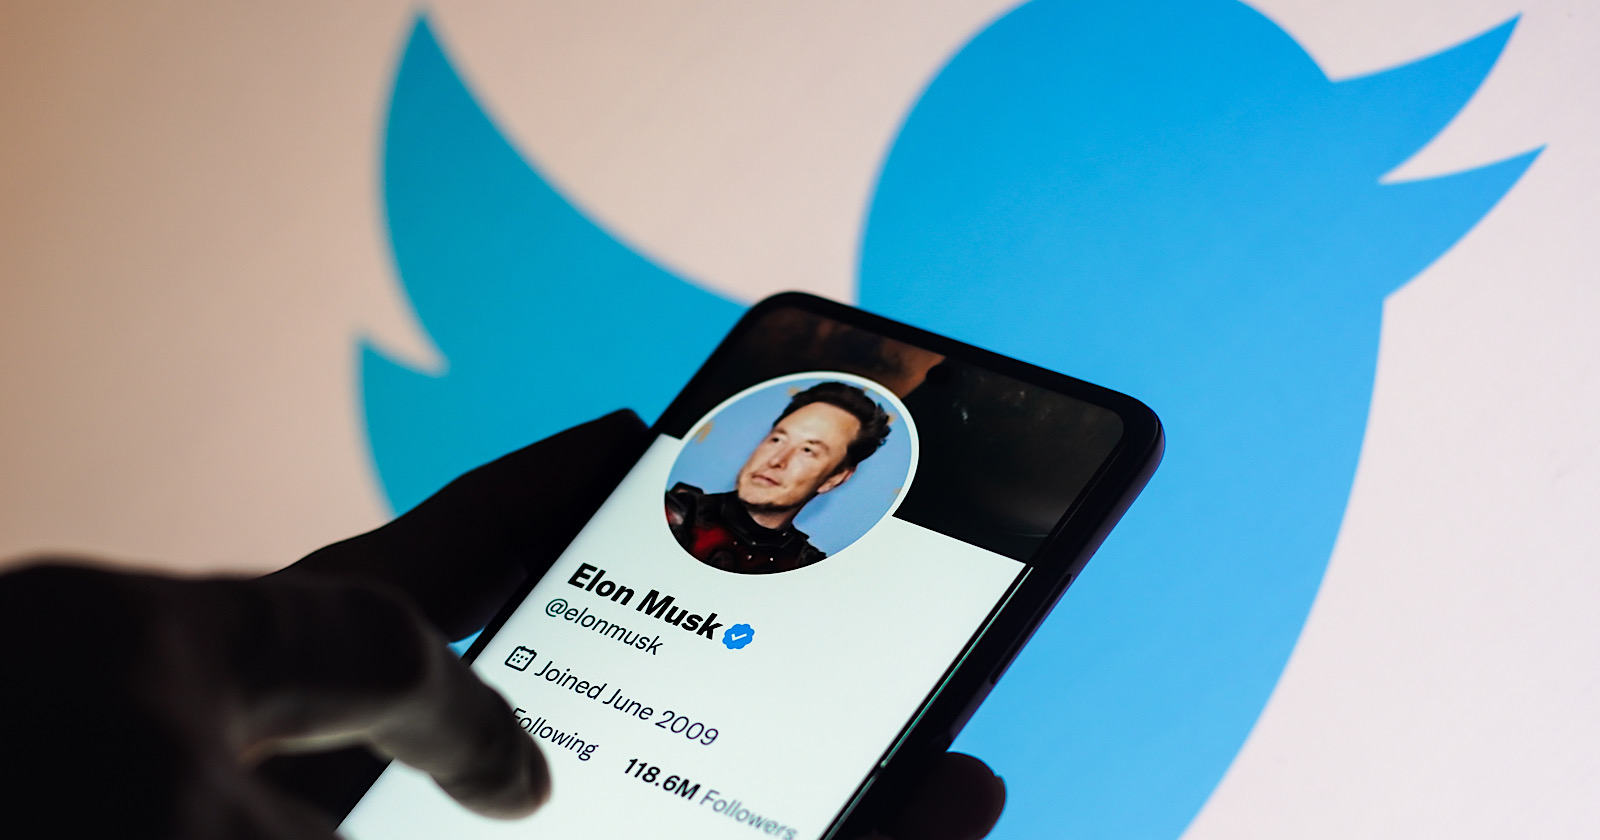 Google’s Twitter rankings plummeted in the wake of Elon Musk’s actions [UPDATED]